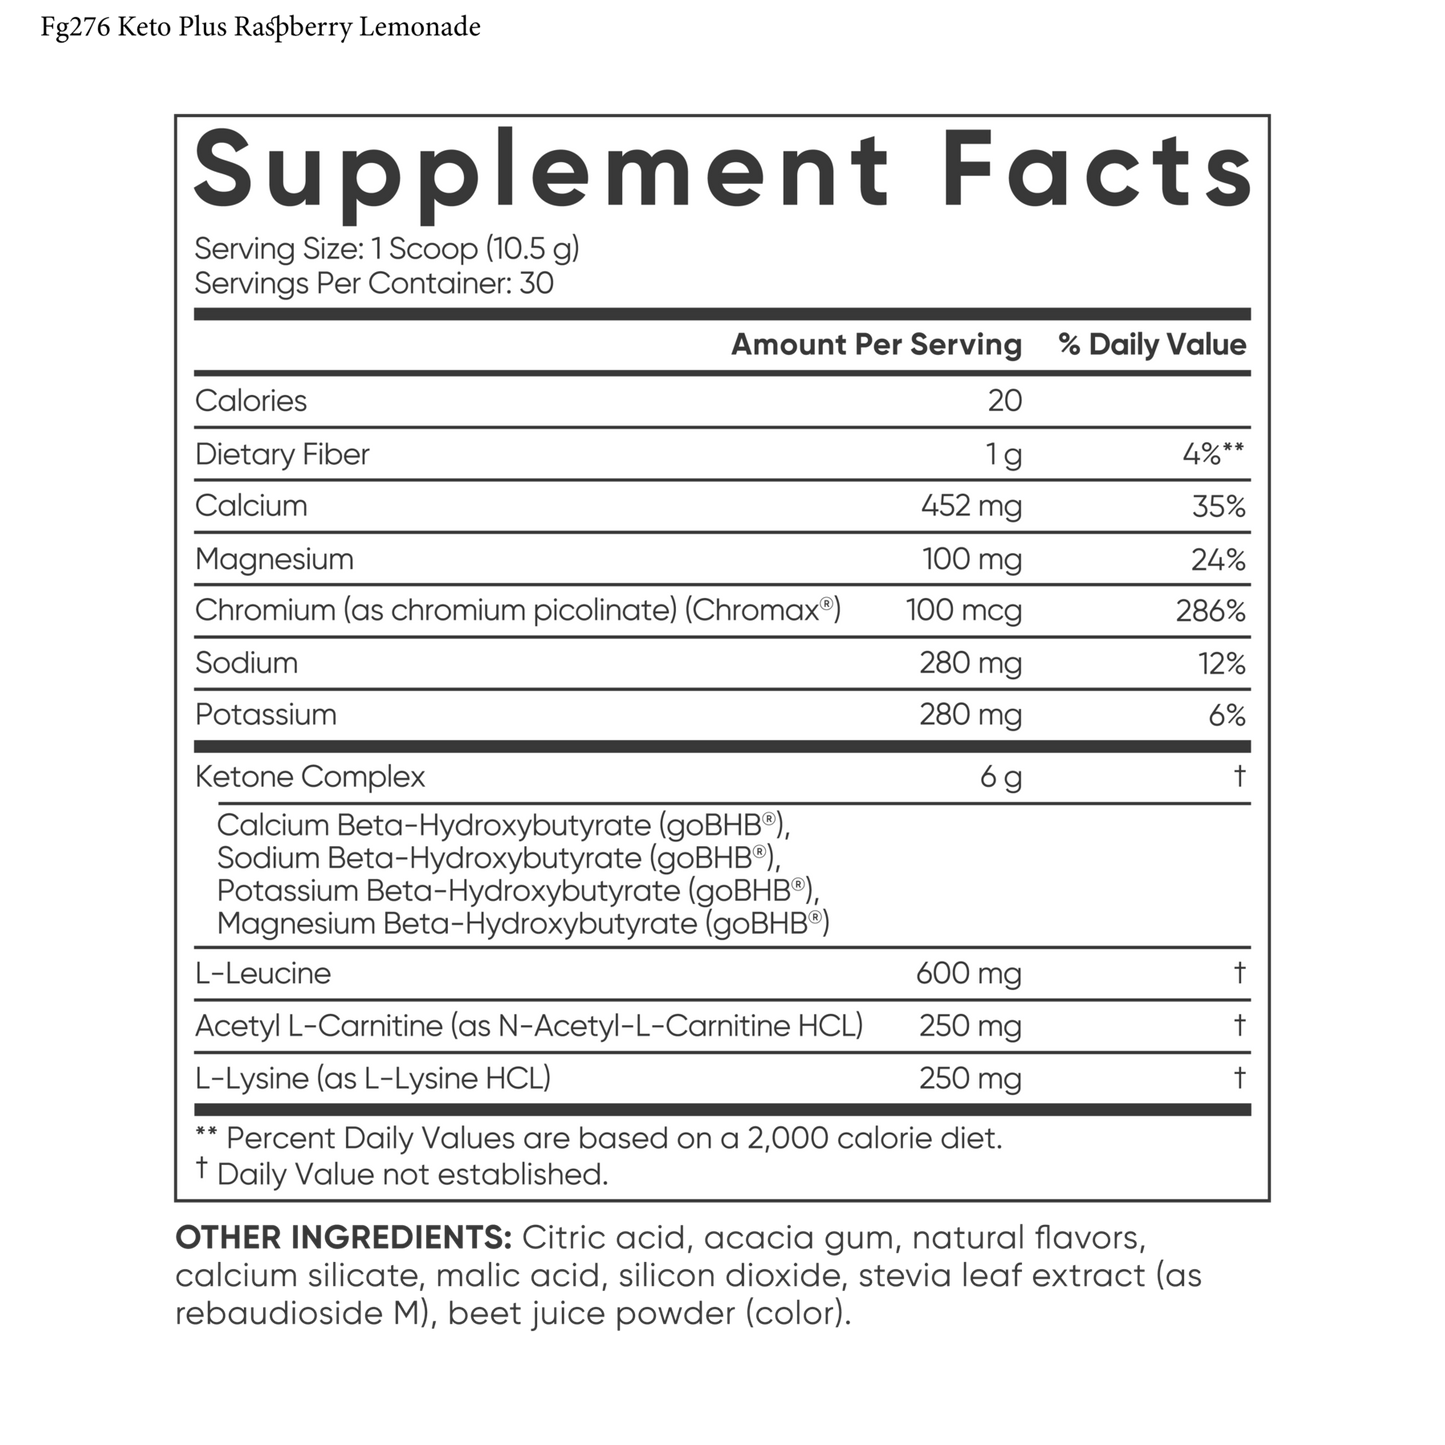 A supplement label with information about Keto Plus with BHB Exogenous Ketones by Sports Research.